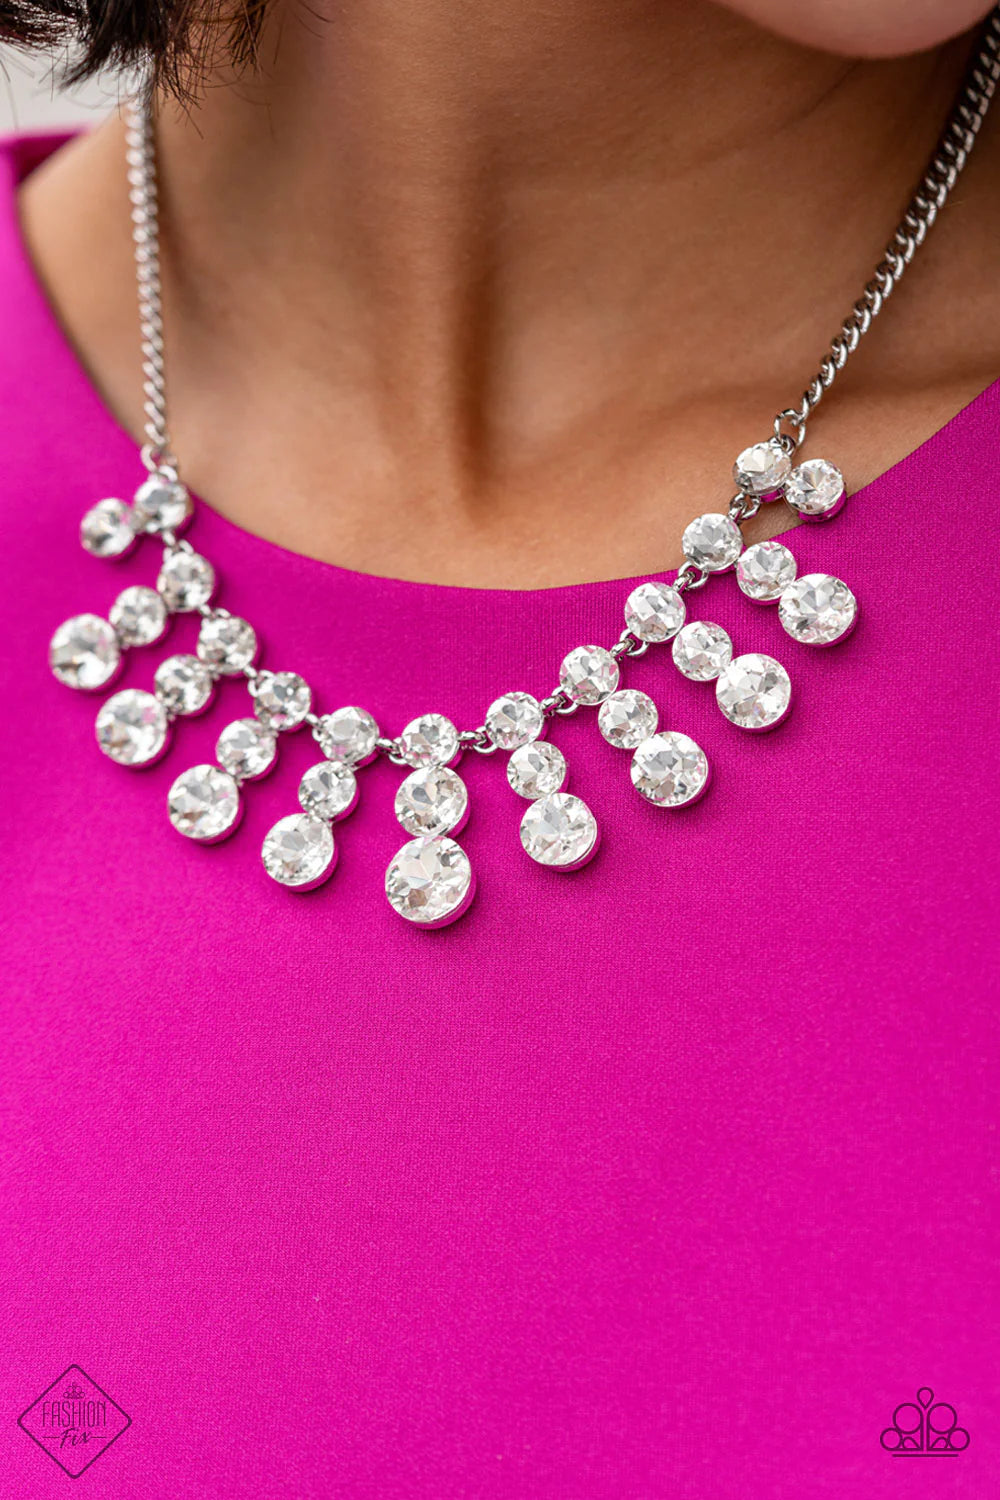 Paparazzi “Celebrity Couture” White Necklace Earring Set